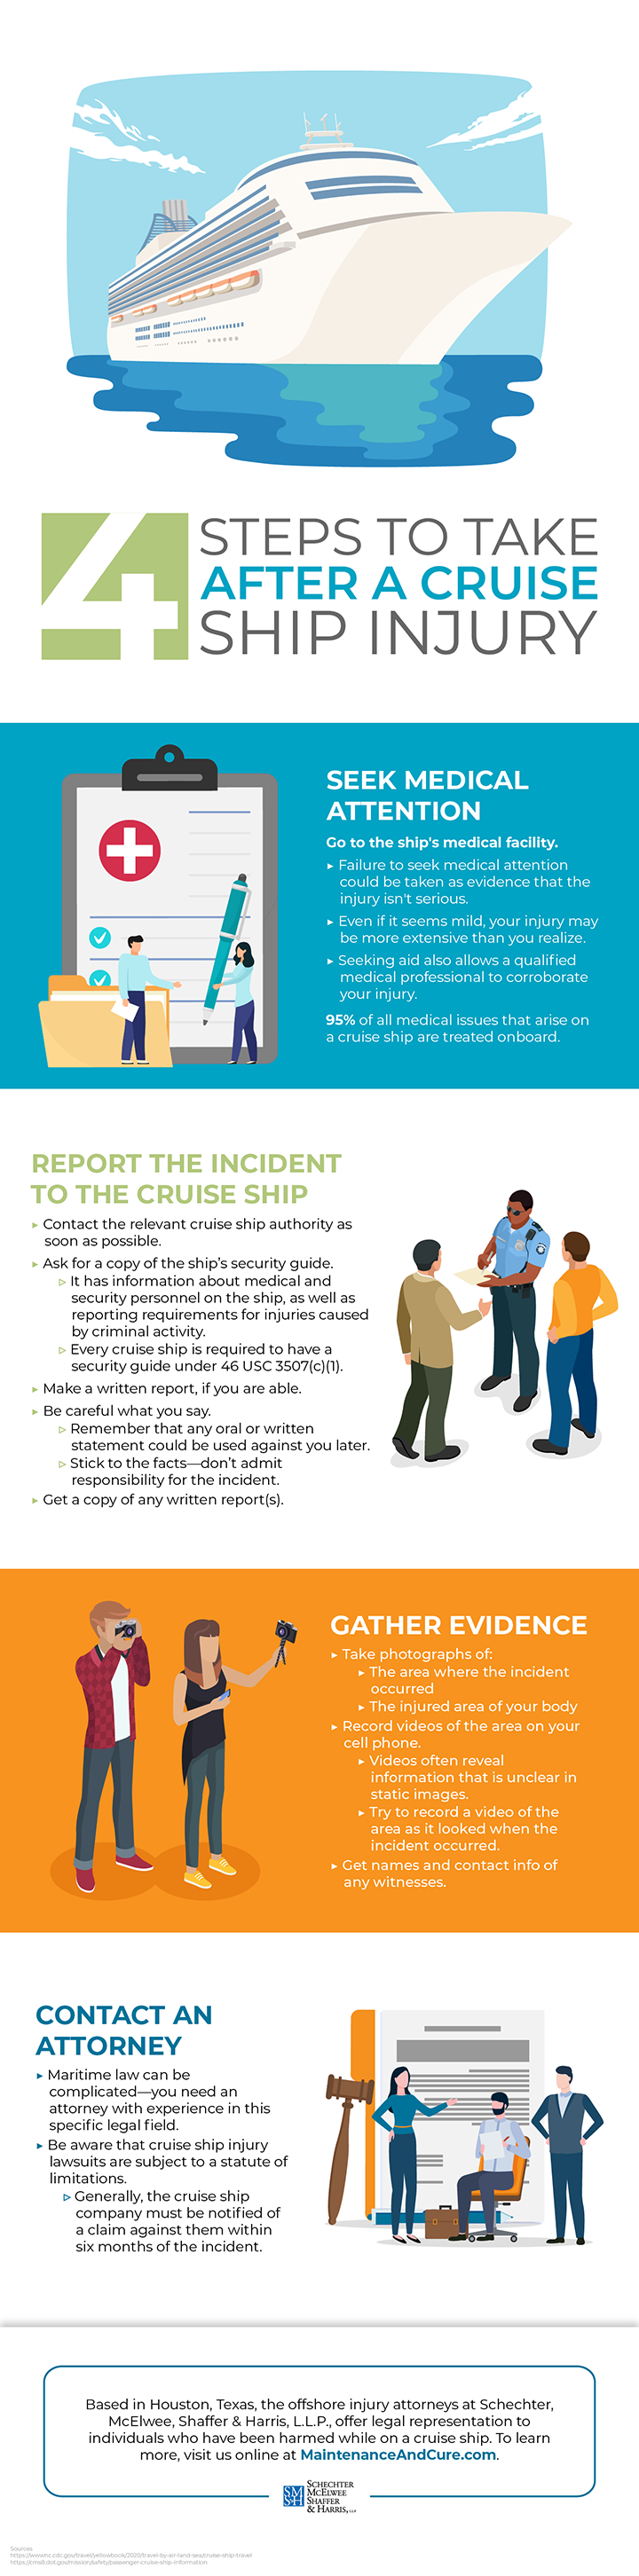 4 Steps to Take After a Cruise Ship Injury Infographic